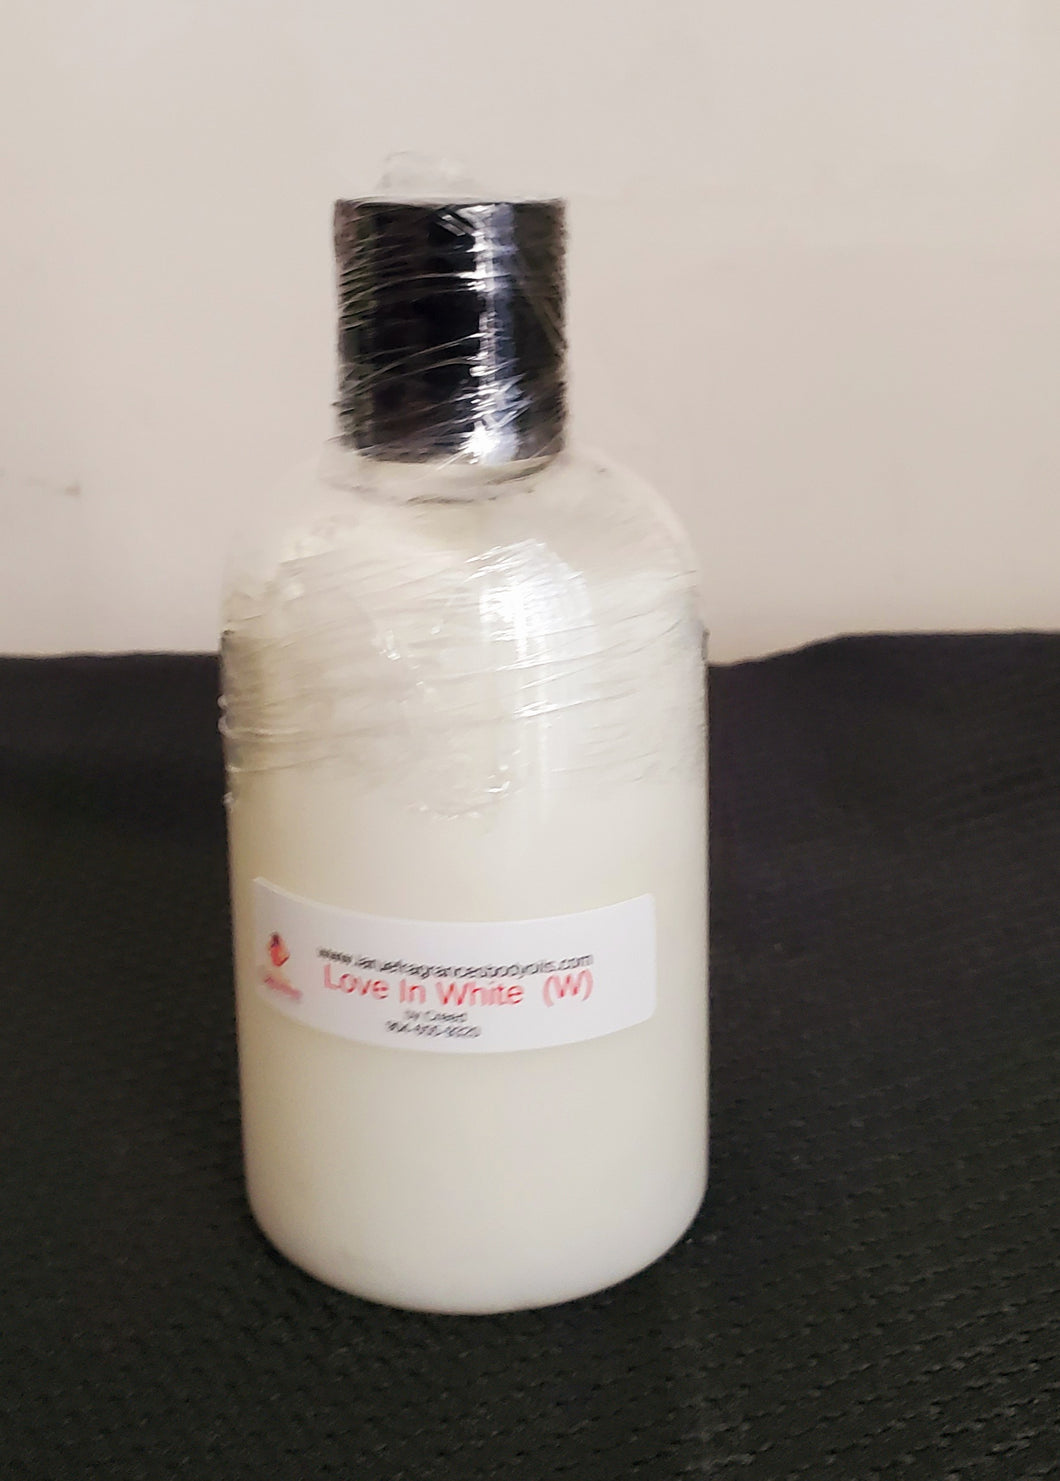 Our Impression Of Love In White Creed 4 oz Luxury Women Hand and Body Shea Butter Lotion